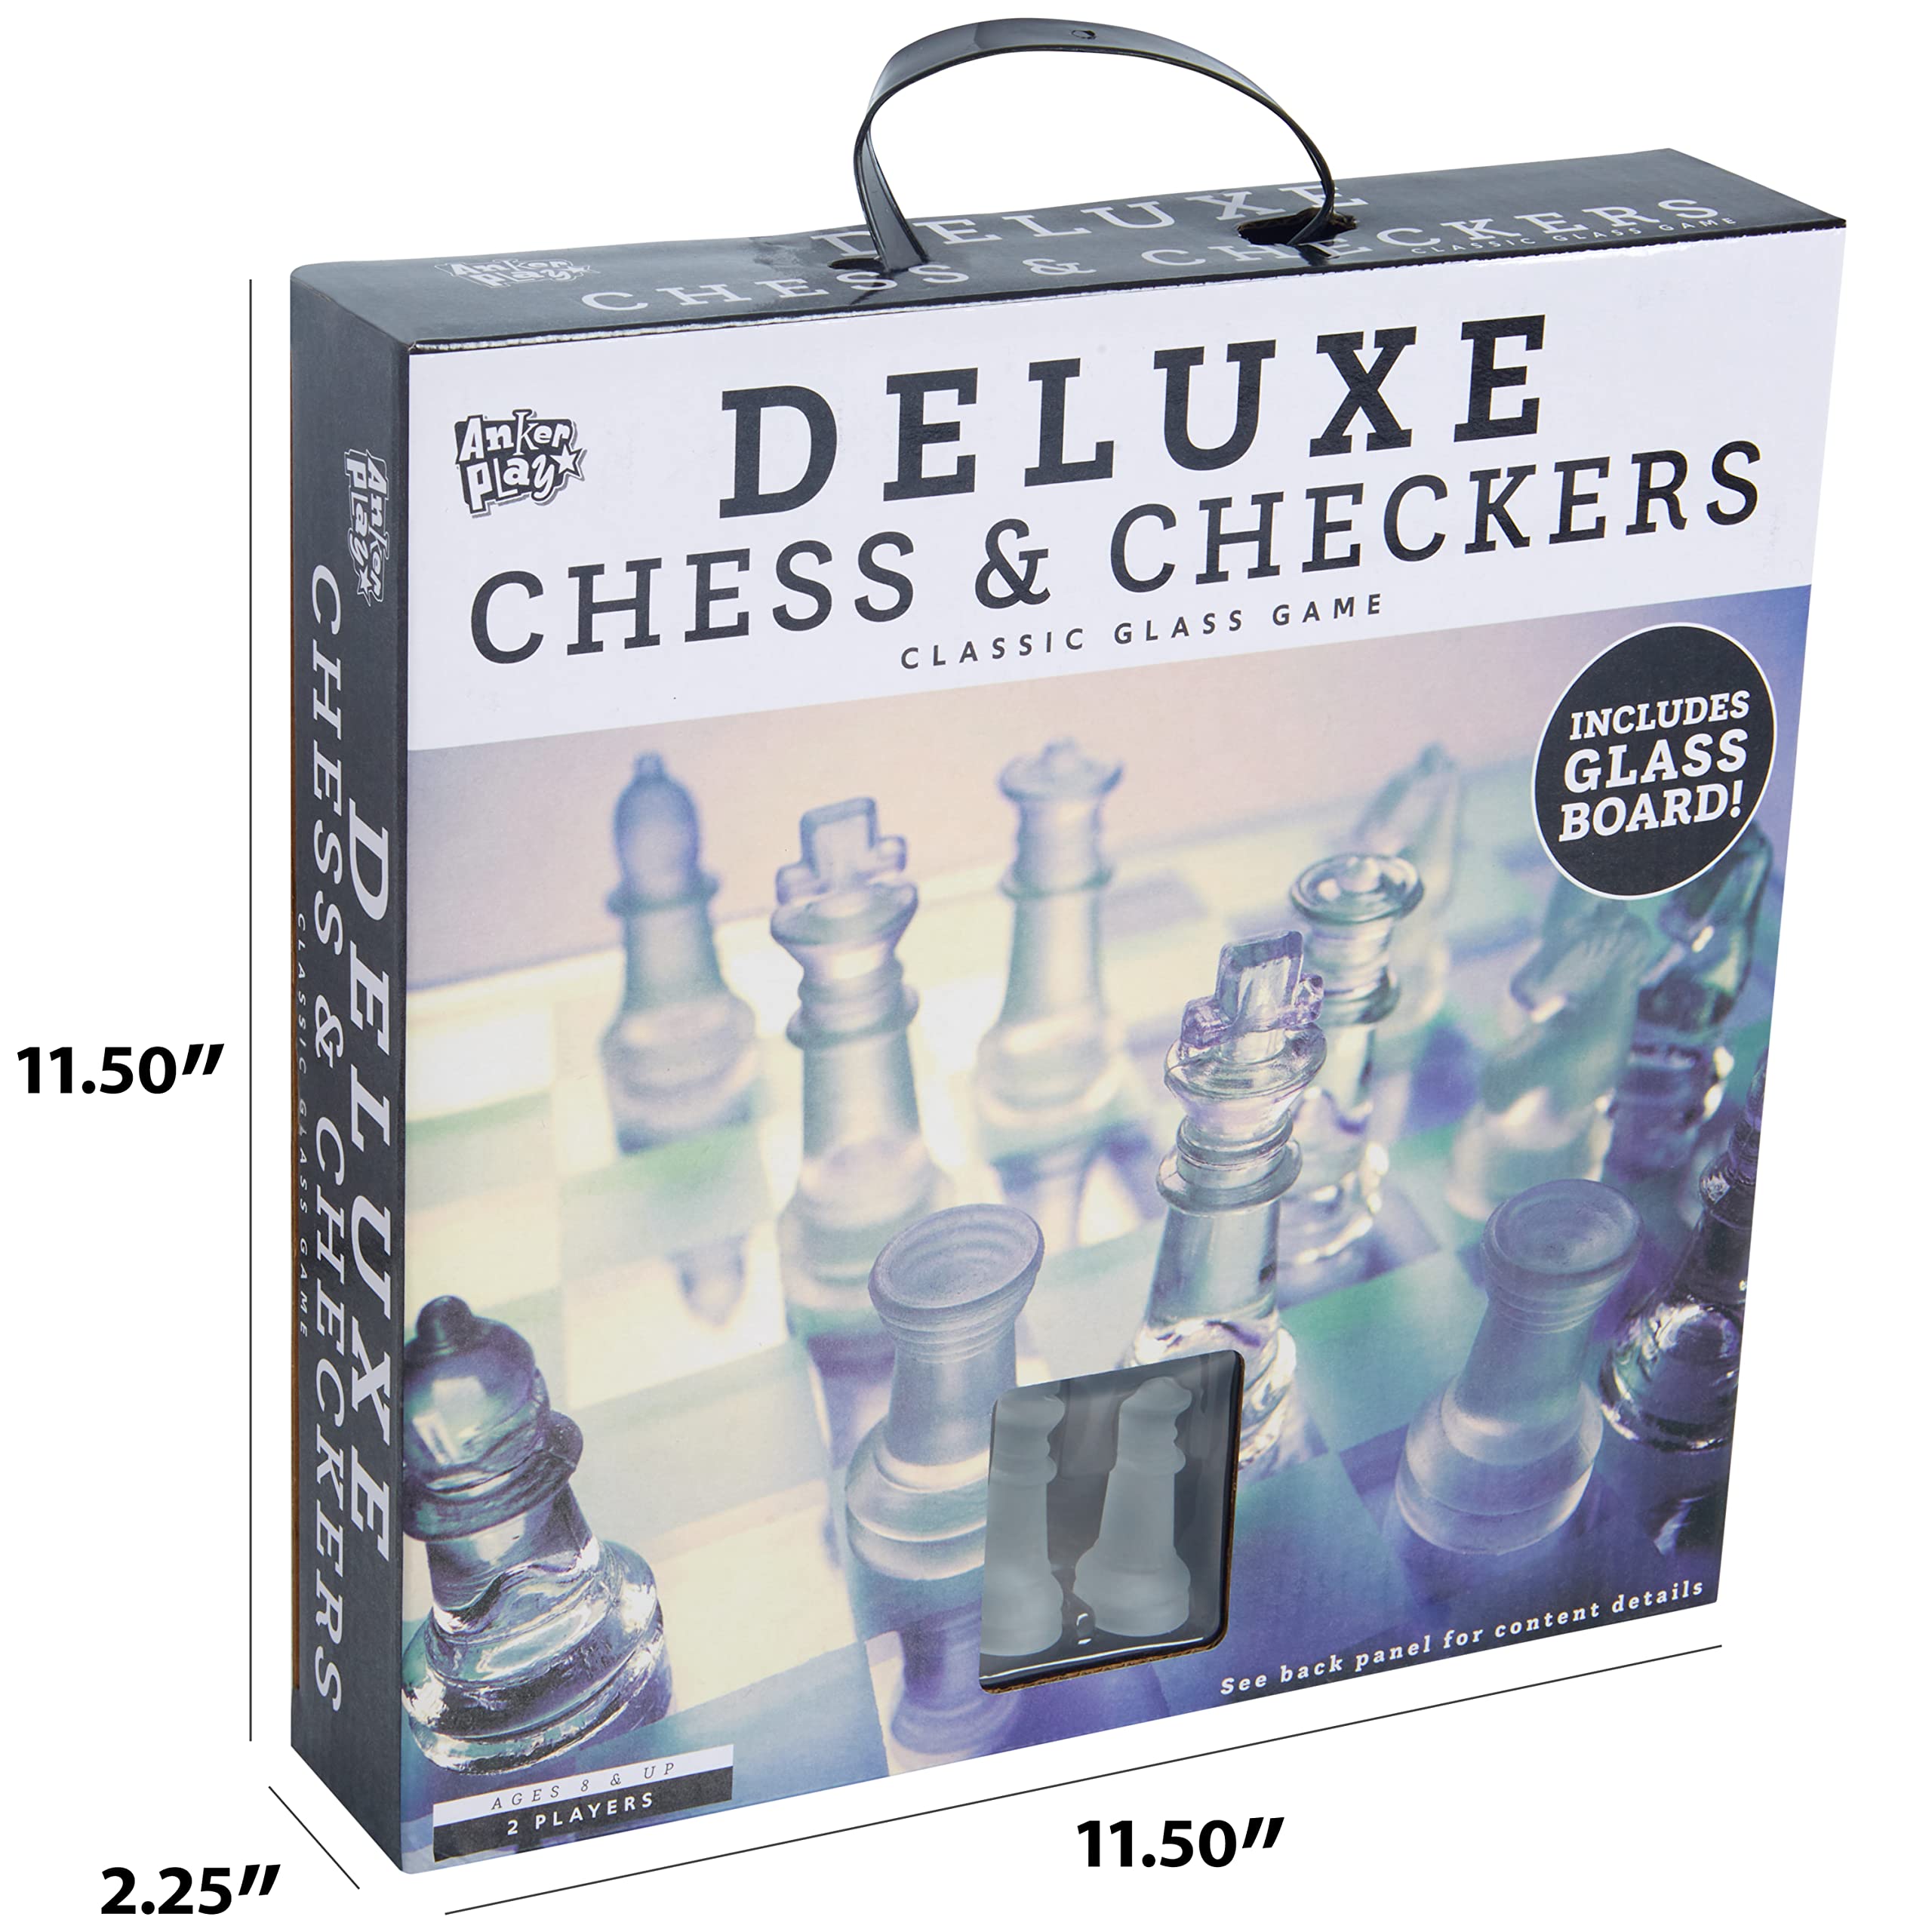 Glass Chess and Checkers Set - Premium Glass Game Kit - Includes 1 Glass Board with 32 Clear and Frosted Checkers Pieces & 32 Clear and Frosted Chess Pieces - Great for Ages 6+